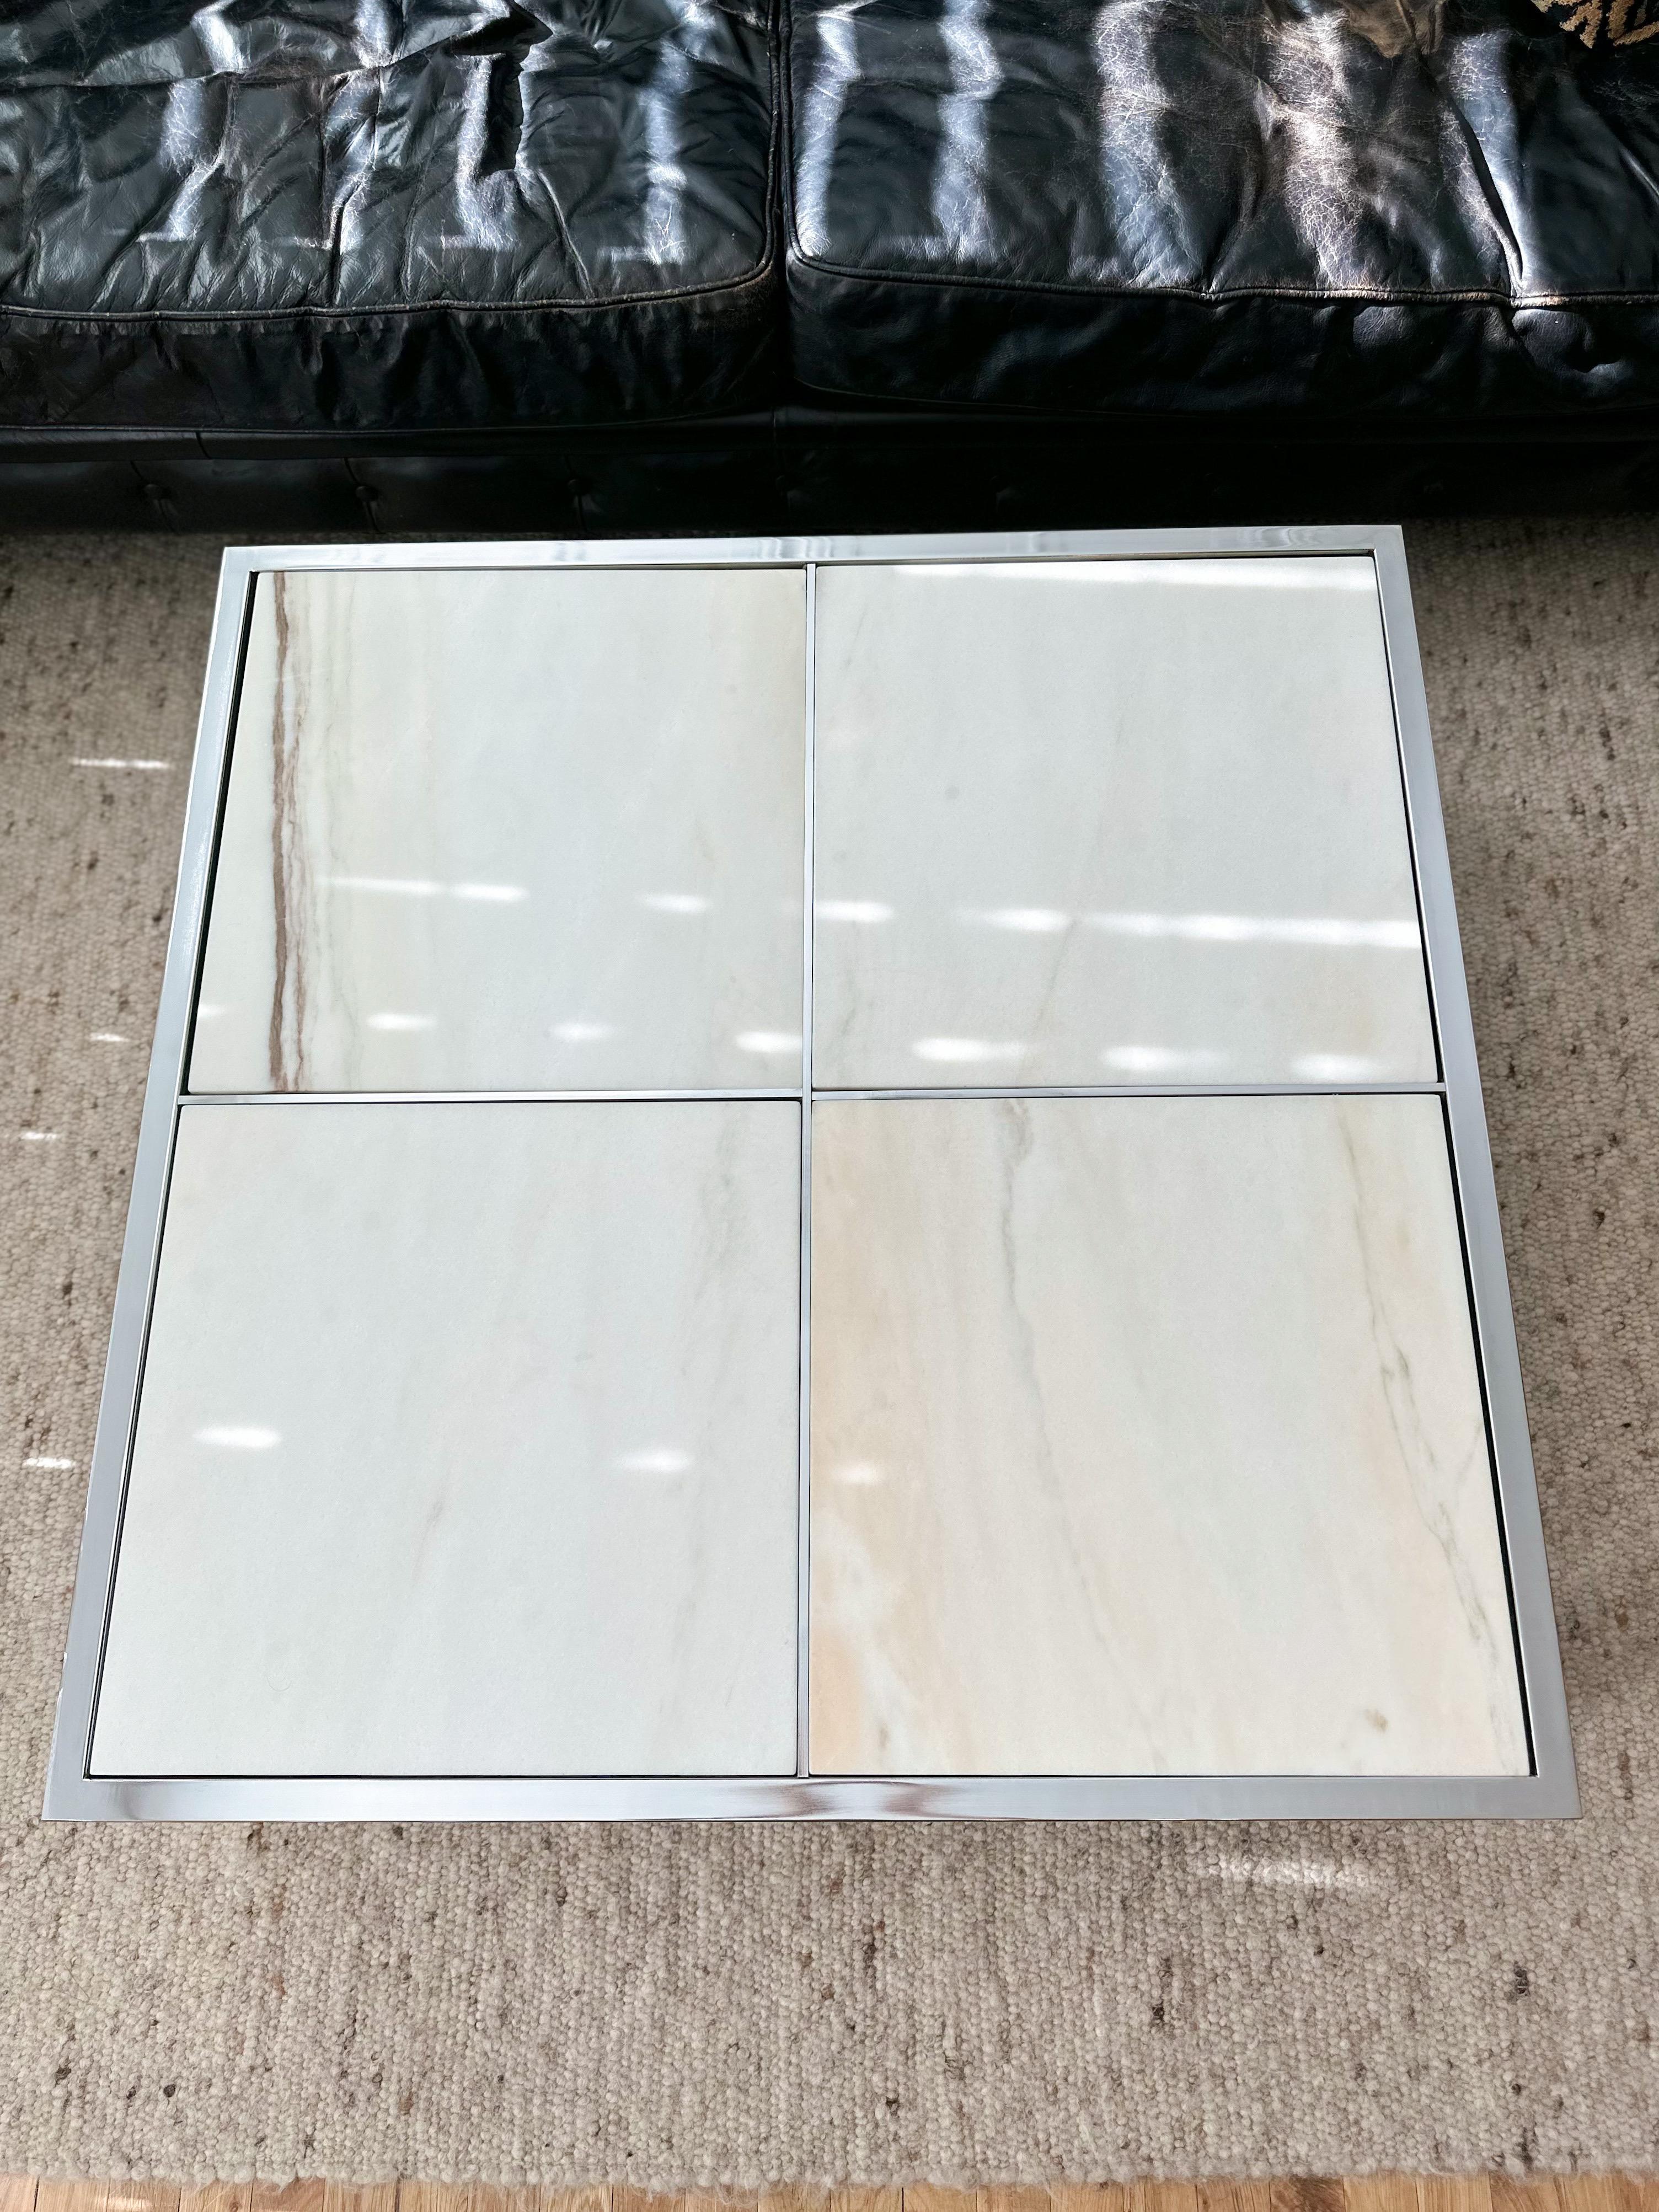 Timelessly elegant chrome and marble square coffee table by Design Institute of America (DIA), c.1970s. Thick chromed steel frame supports four large Portuguese marble slabs with white, gray, and beige tones. Slabs sit comfortably within the